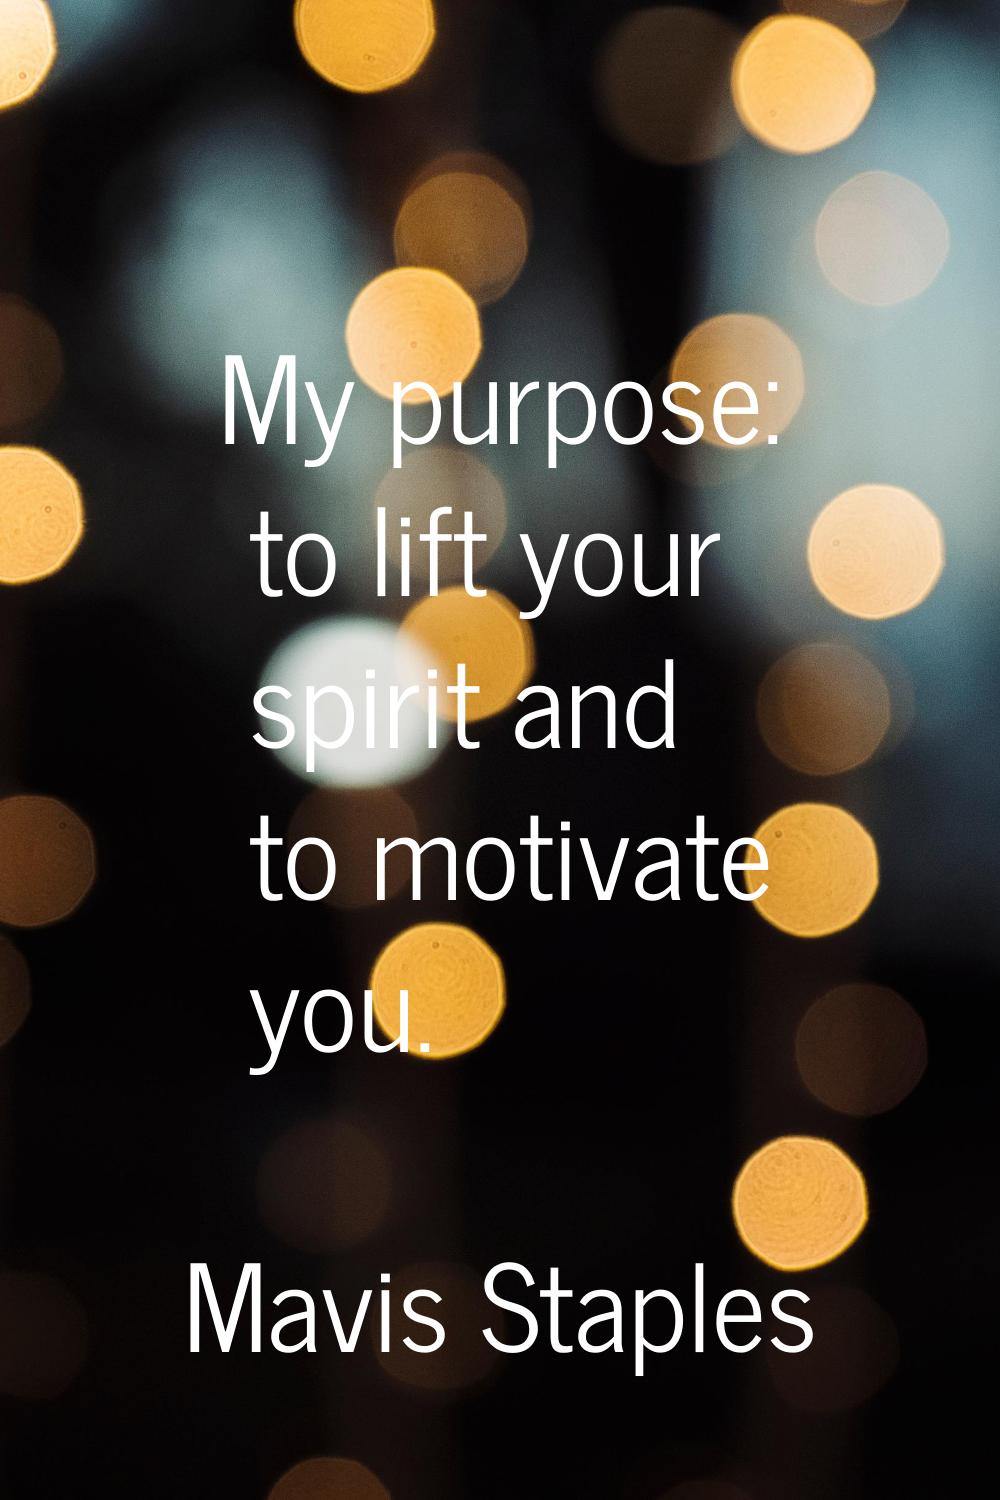 My purpose: to lift your spirit and to motivate you.